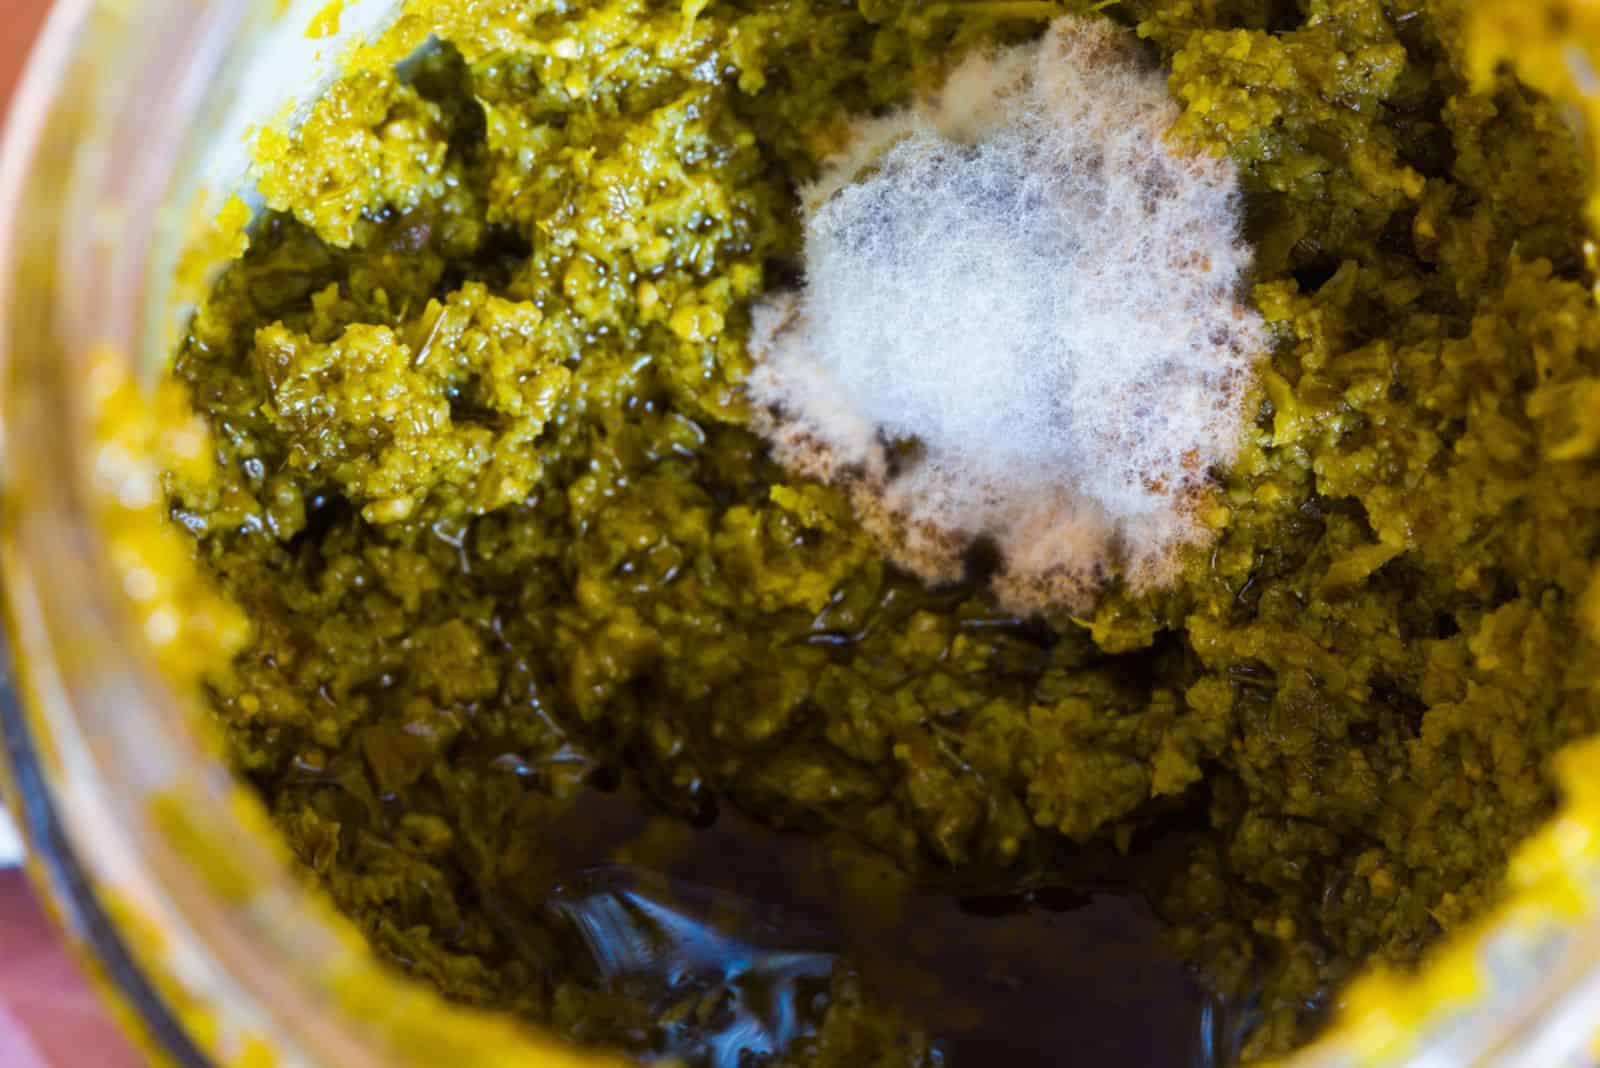 Spoiled pesto paste in a jar and white mold